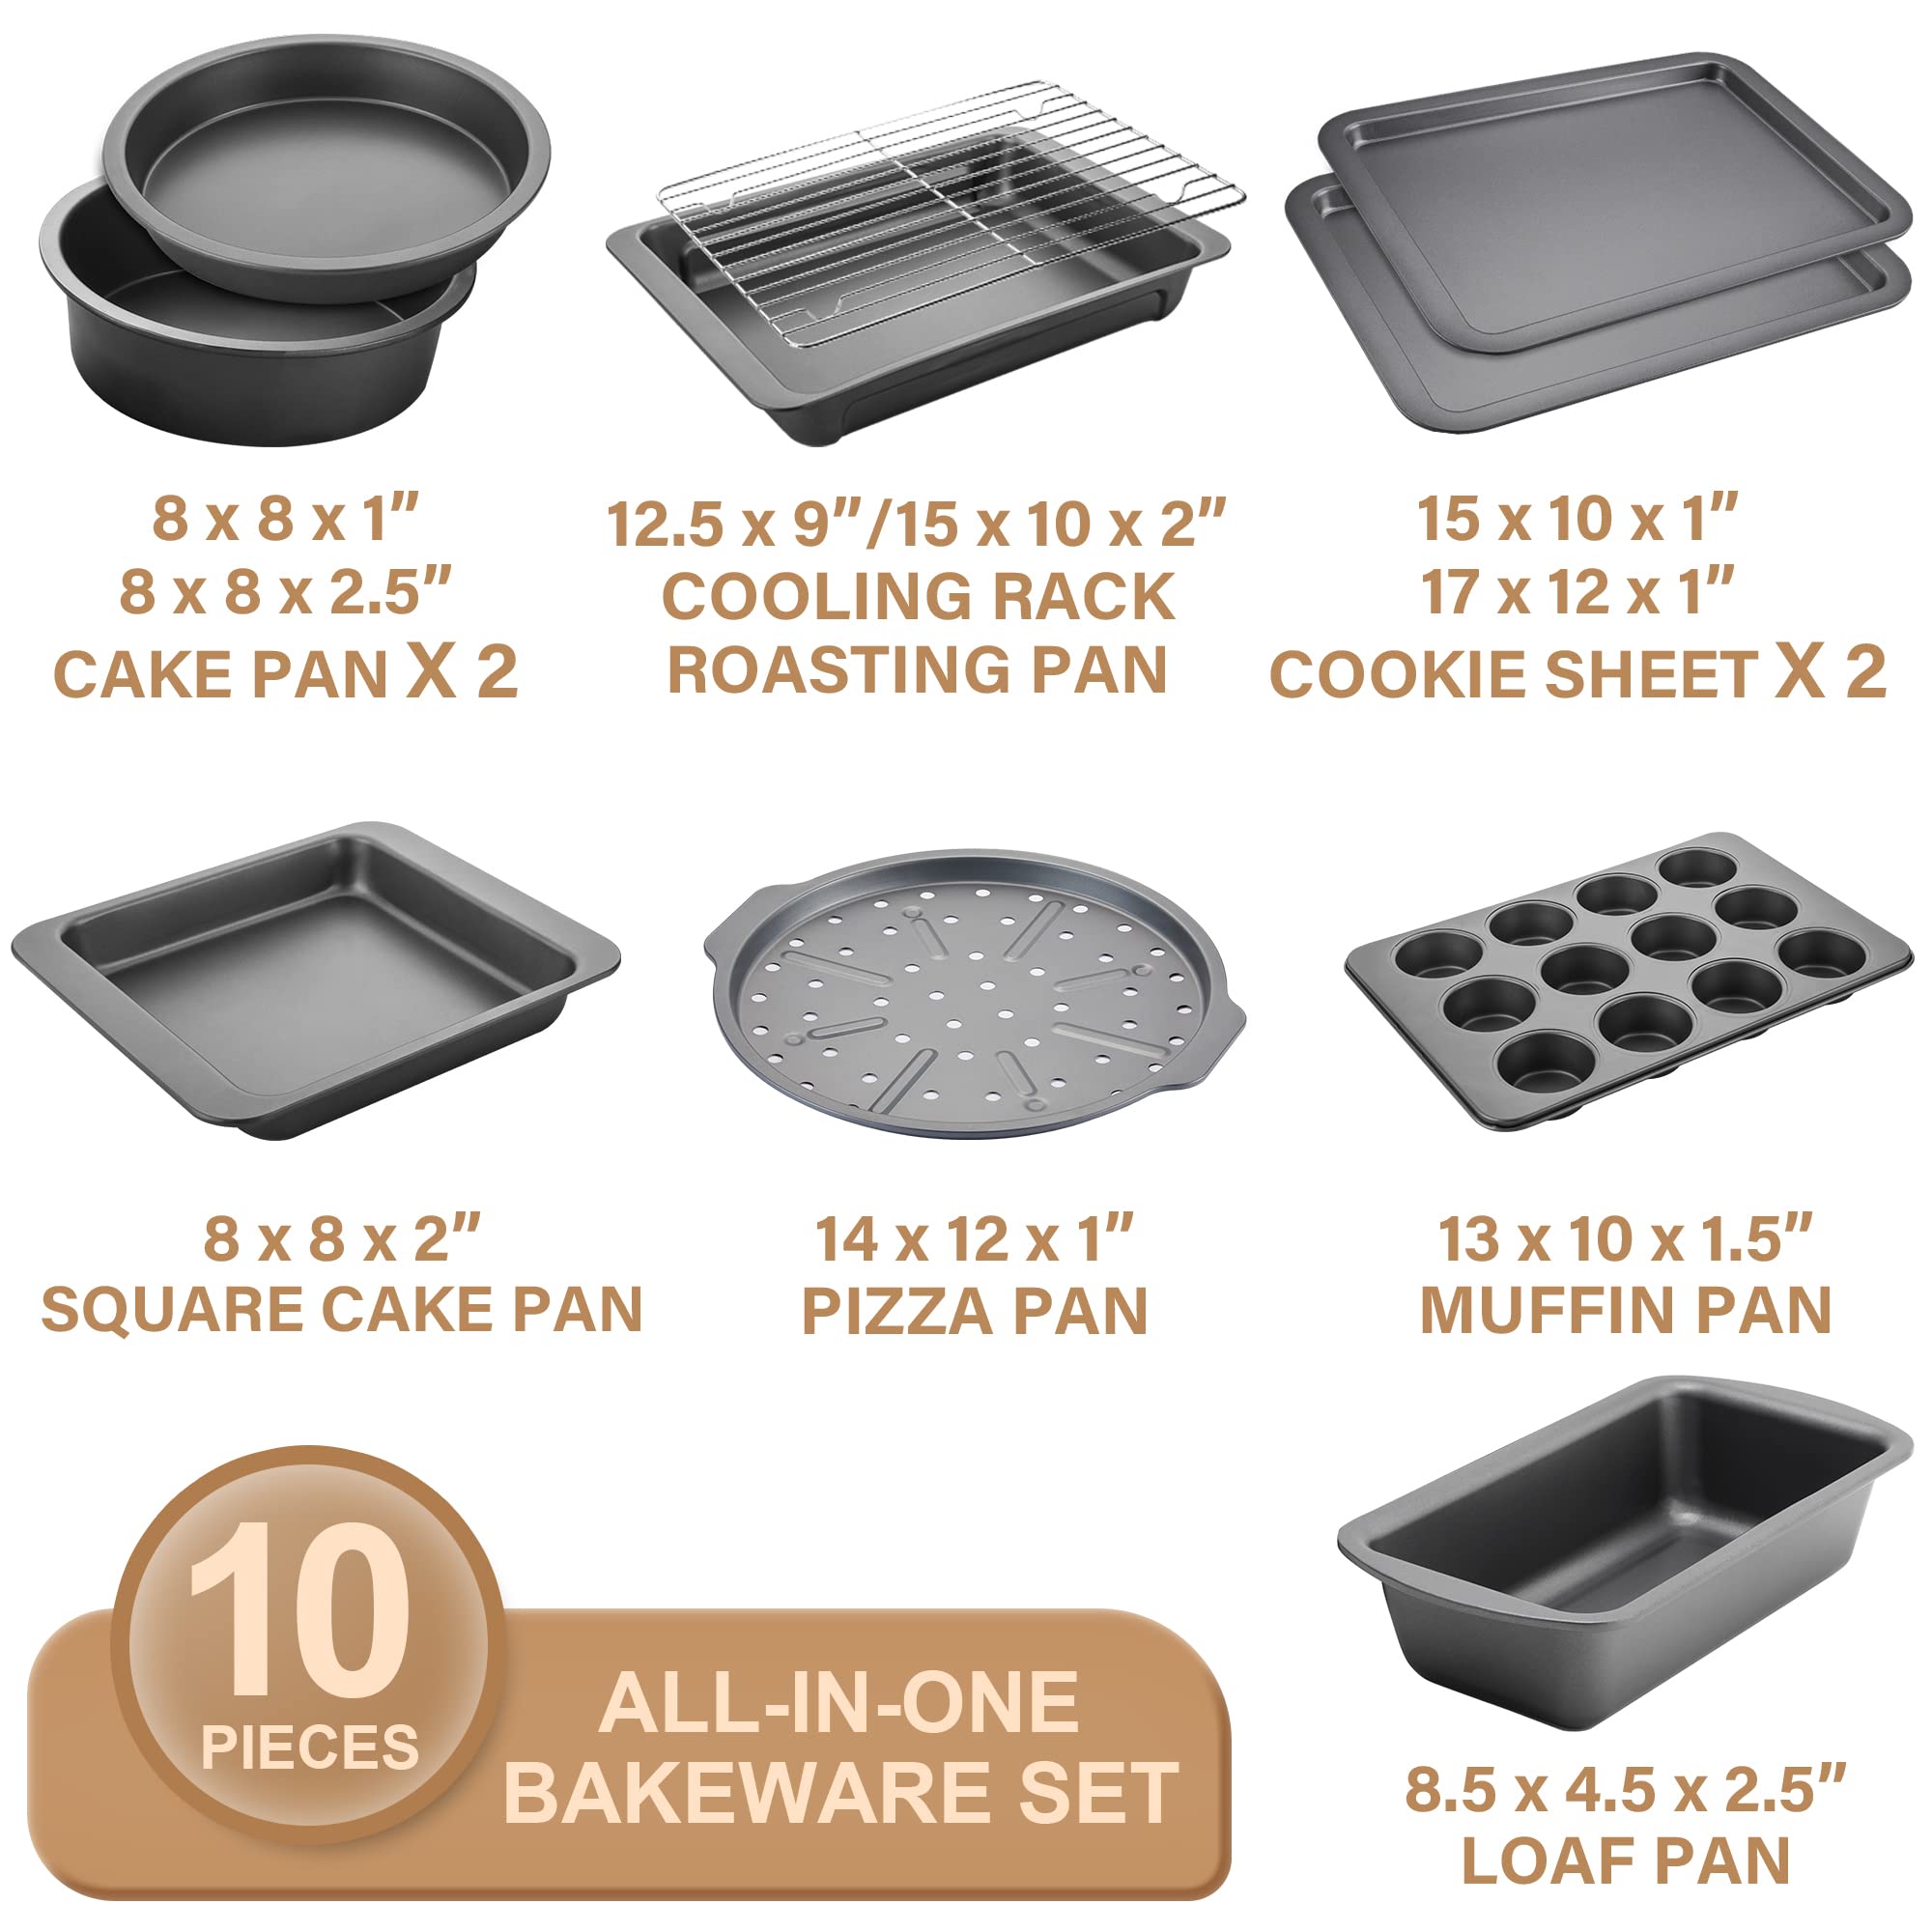 HONGBAKE Bakeware Sets, Baking Pans Set, Nonstick Oven Pan for Kitchen with Wider Grips, 10-Pieces Including Rack, Cookie Sheet, Cake Pans, Loaf Pan, Muffin Pan, Pizza Pan - Grey